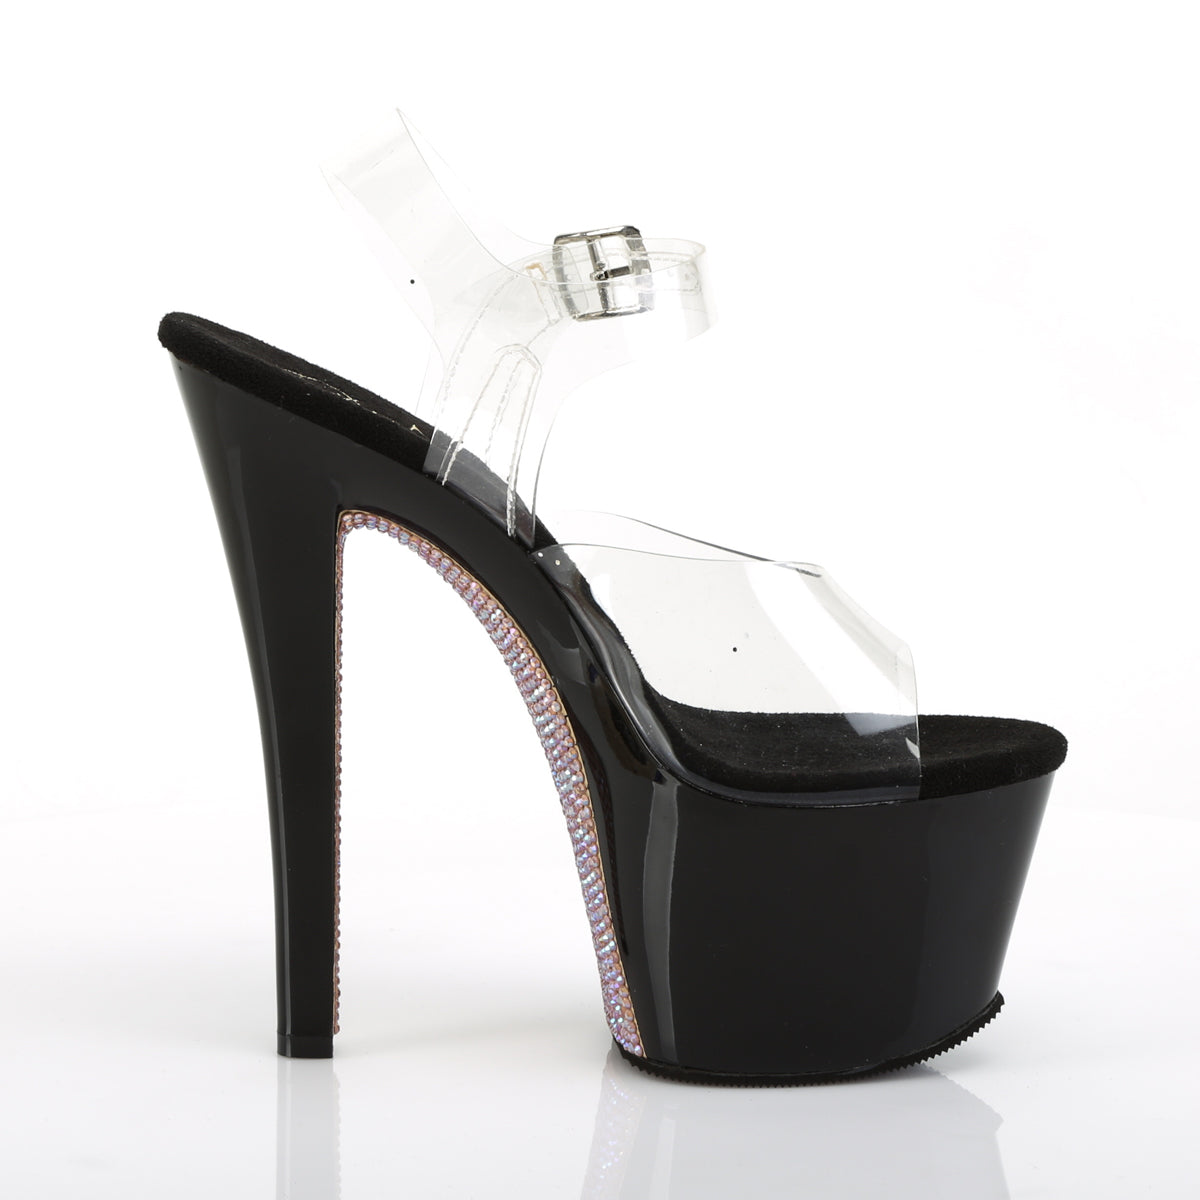 SKY-308CRS 7" Heel Clear Black-Champagne Pole Dancer Shoes-Pleaser- Sexy Shoes Fetish Heels